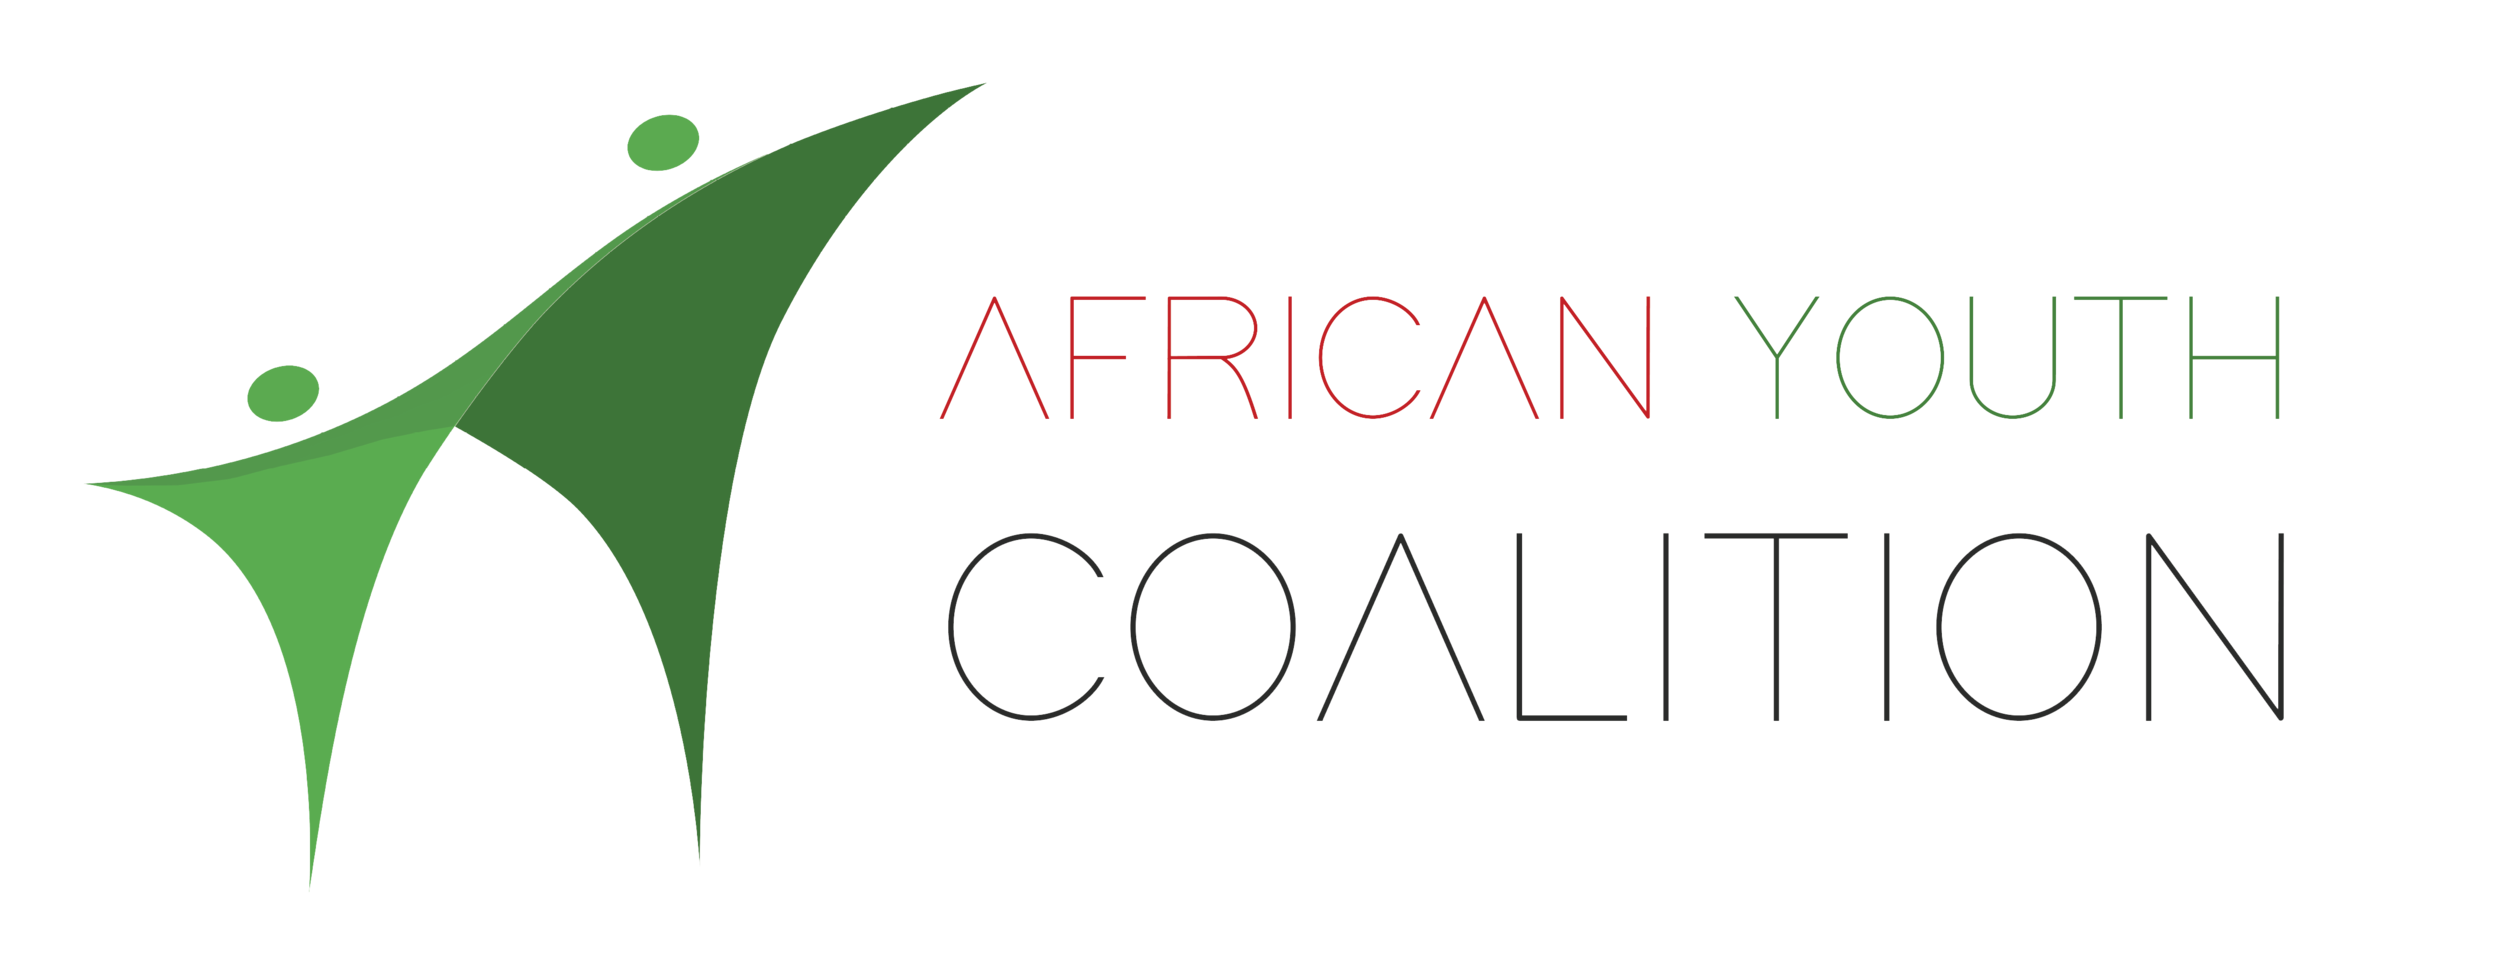 African_Youth_Coalition_Logo_Final.png